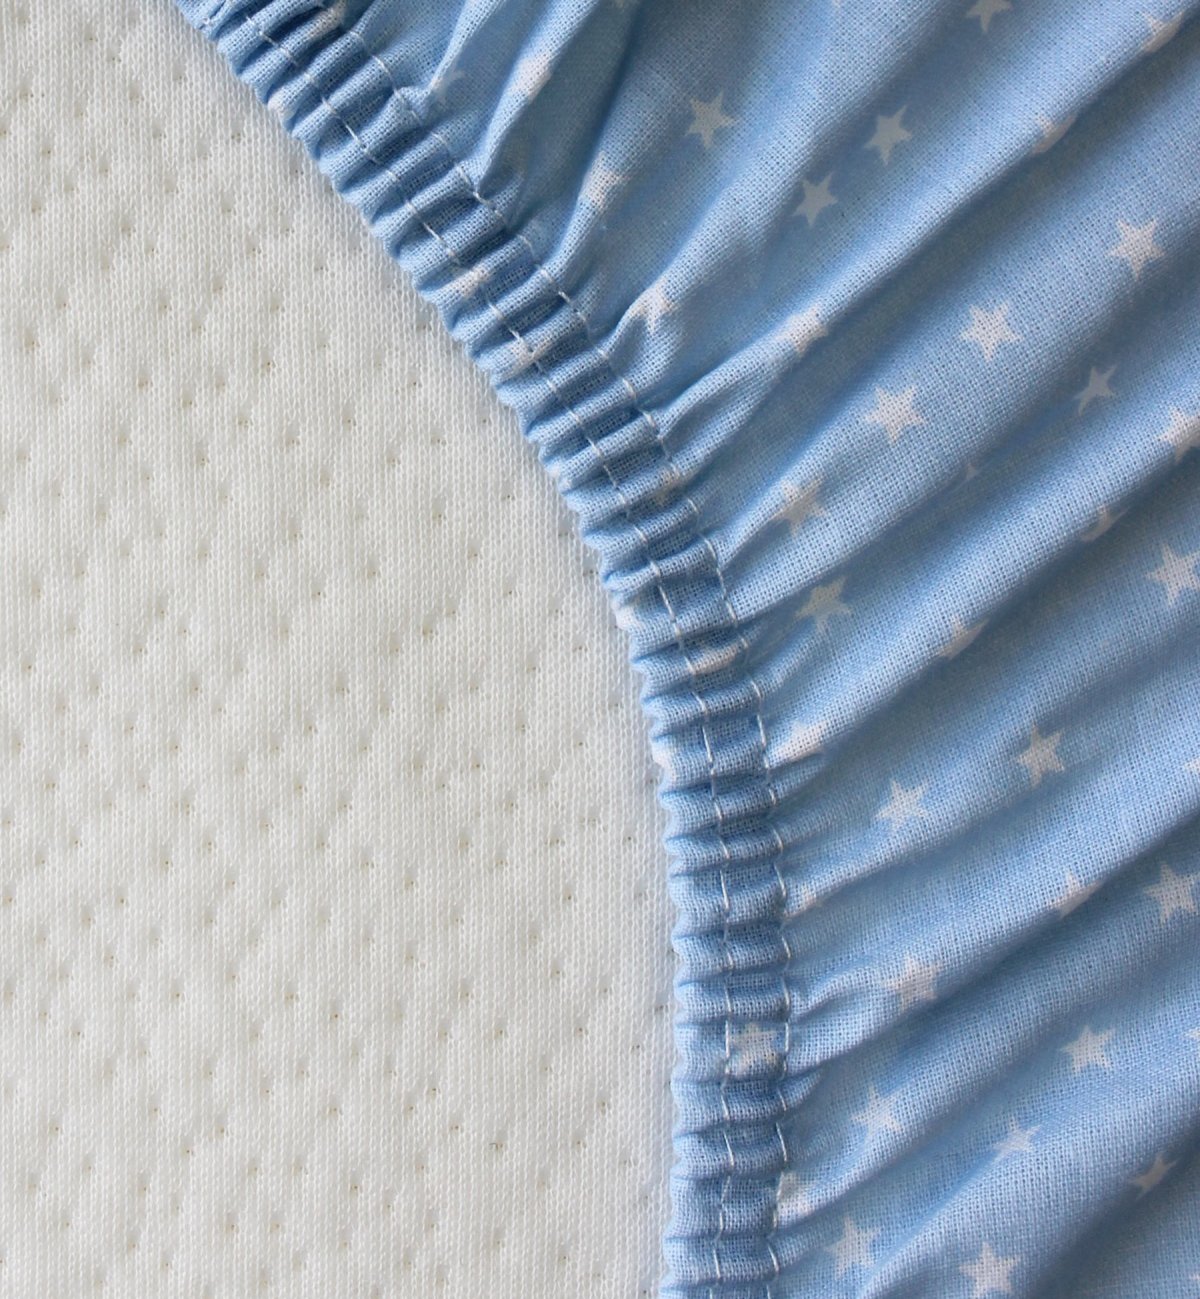 Organic Cotton fitted sheet with stars pattern for crib